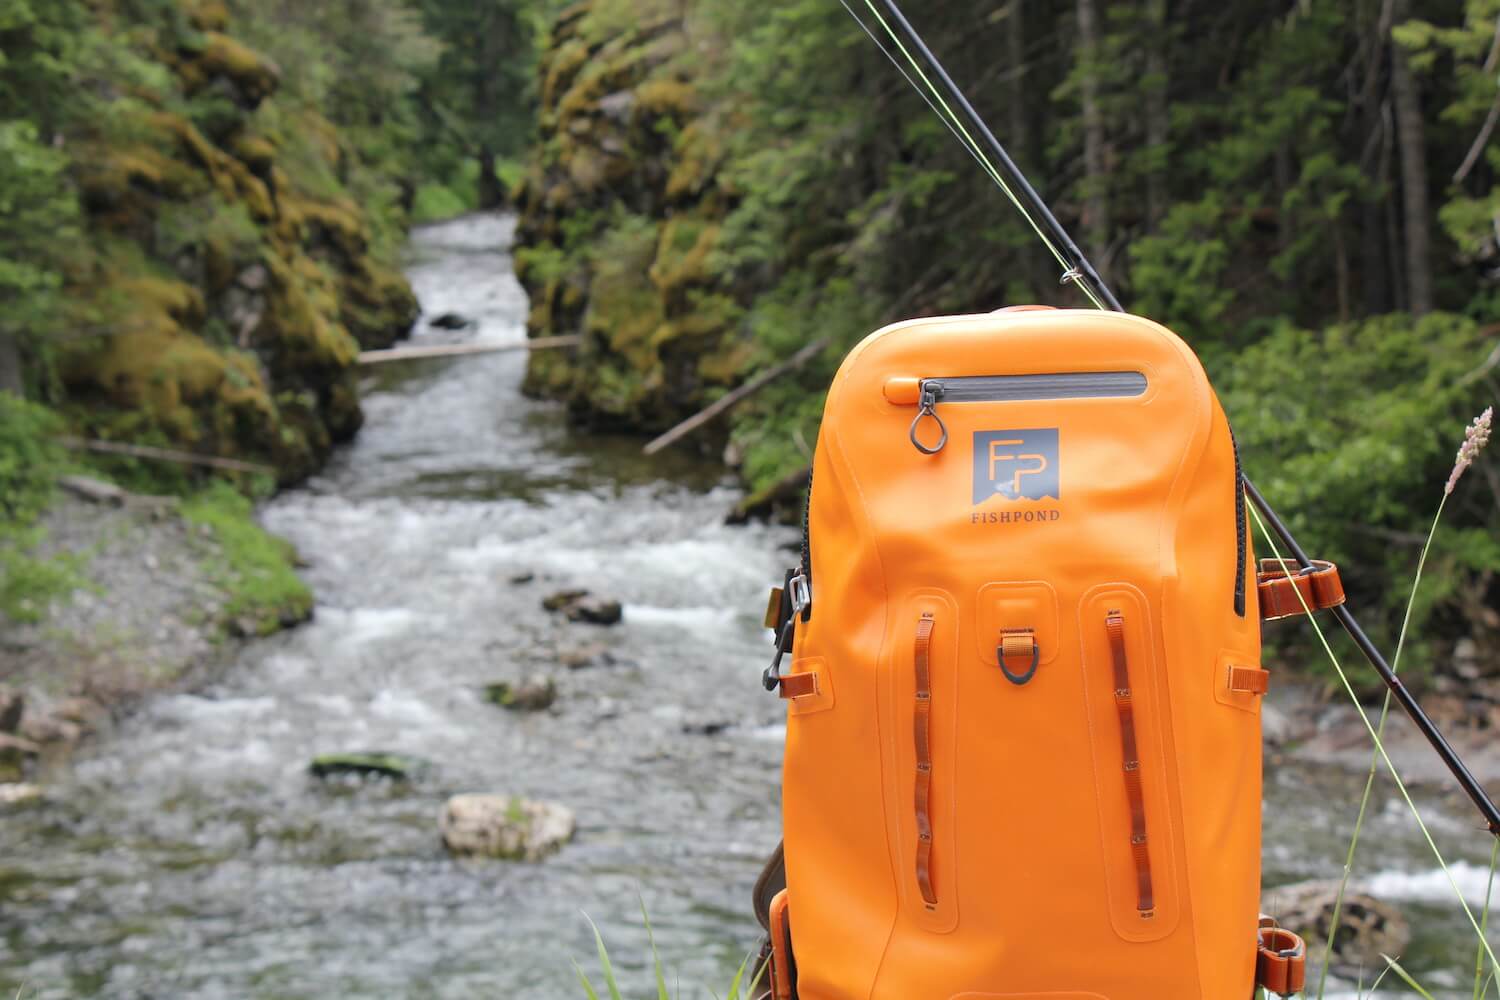 Assimilation distress Prove 20 Best Fishing Backpacks for 2022 - Man Makes Fire